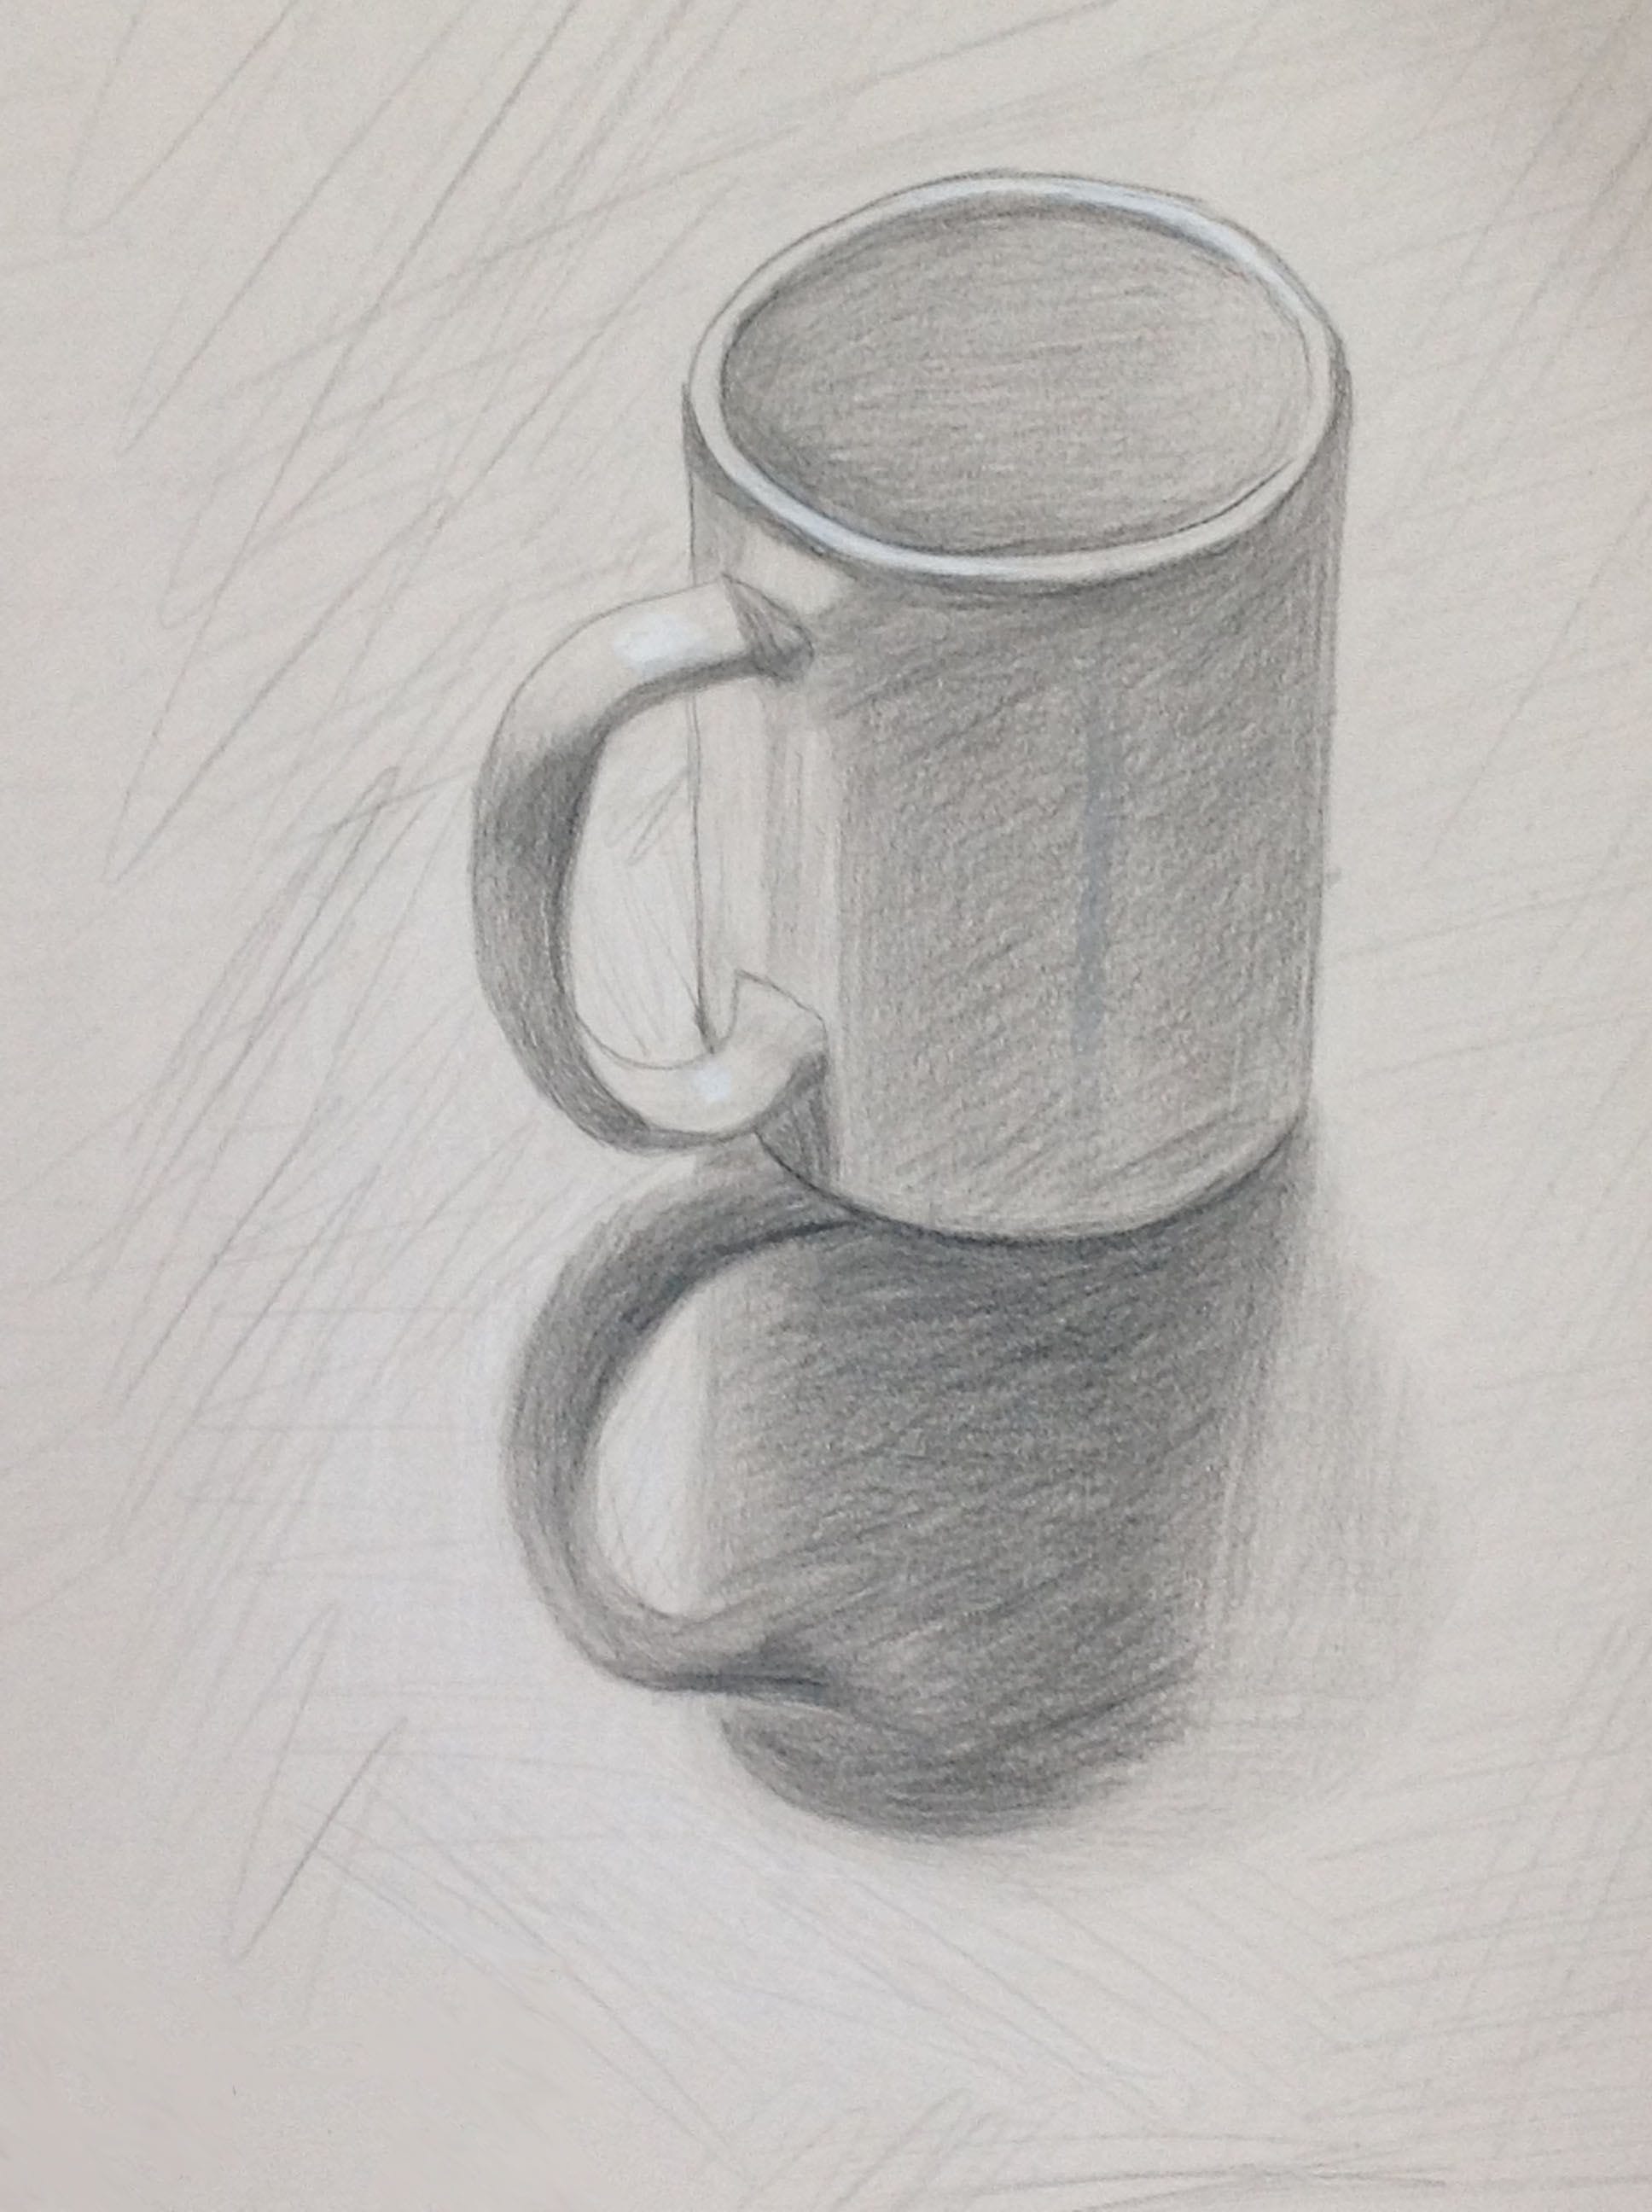 Cup With Handle, 2019
Colored Pencils on Paper
9"W x 12"H, Walli White, artist